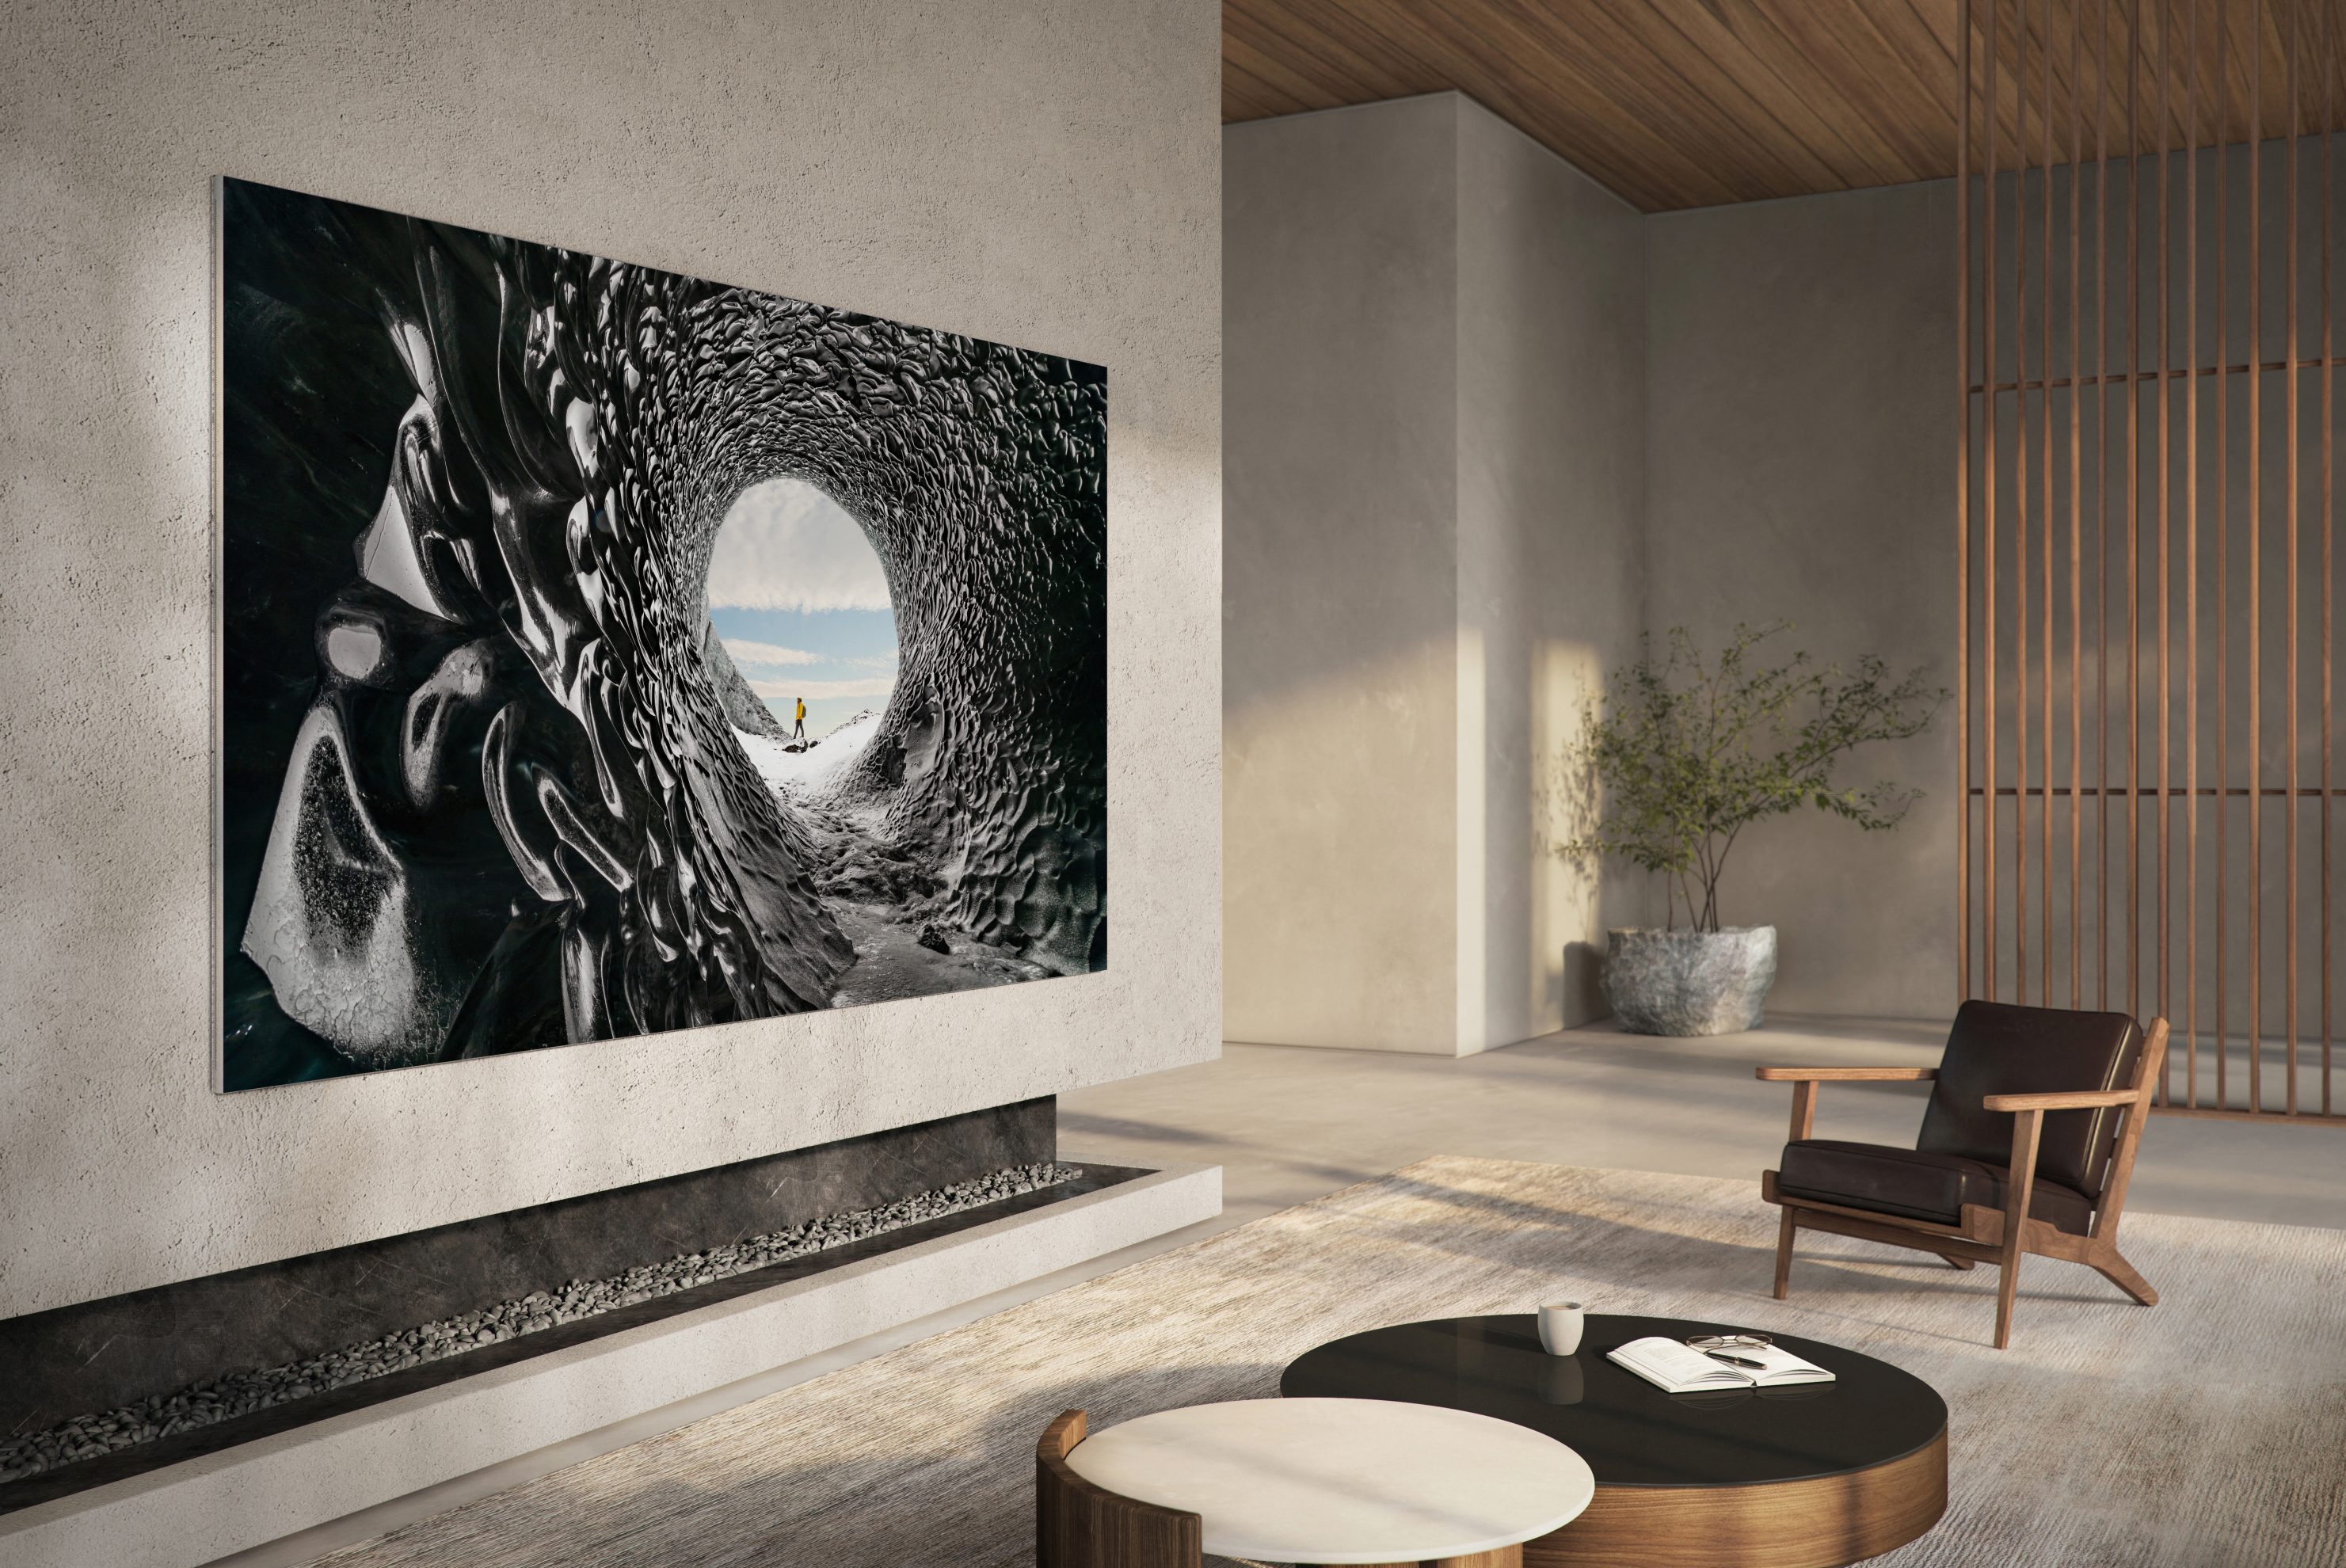 Samsung announced the groundbreaking 110” Samsung MicroLED.